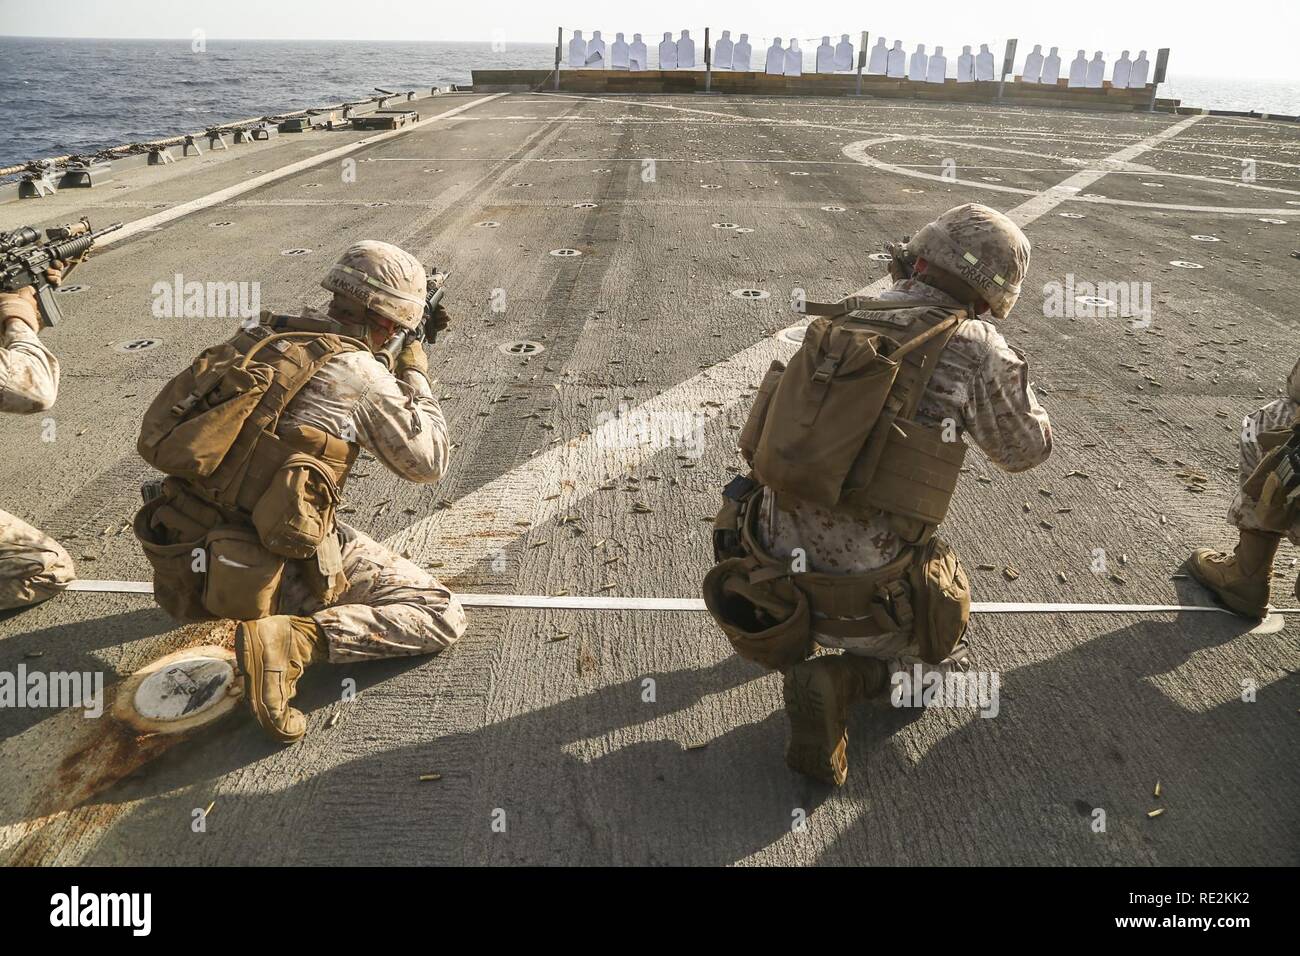 RED SEA (Nov. 14, 2016) Marine Cpl. Joseph M. Hunsaker, left, and Cpl. Daniel K. Drake, right, with Charlie Company, Battalion Landing Team, 1st Battalion, 6th Marine Regiment, 22nd Marine Expeditionary Unit (MEU) aim at targets during a combat marksmanship range aboard the amphibious dock landing ship USS Whidbey Island (LSD 41), Nov. 14, 2016. 22nd MEU, deployed with the Wasp Amphibious Ready Group, is maintaining regional security in the U.S. 5th Fleet area of operations. Stock Photo